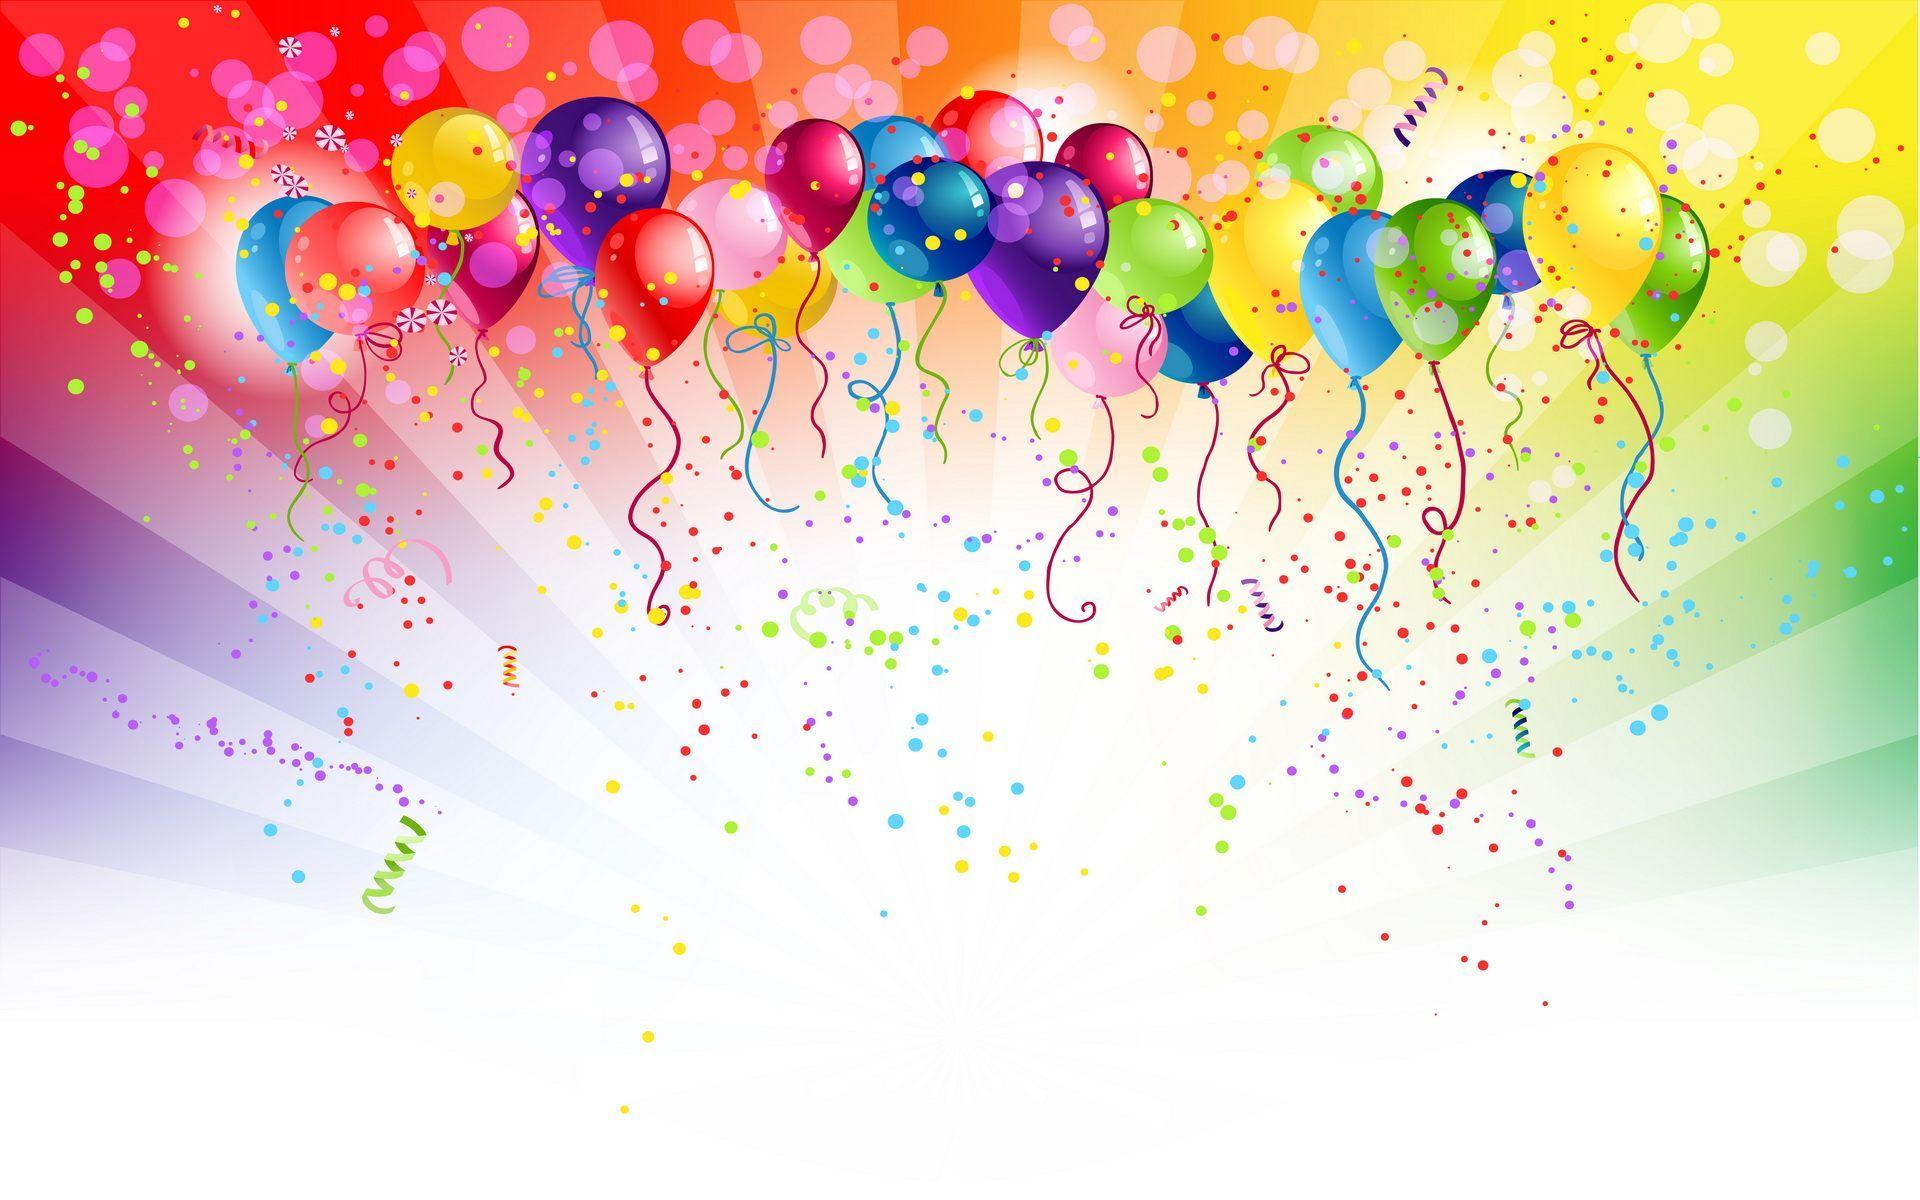 35 Balloons Png Stock Video Footage - 4K and HD Video Clips | Shutterstock